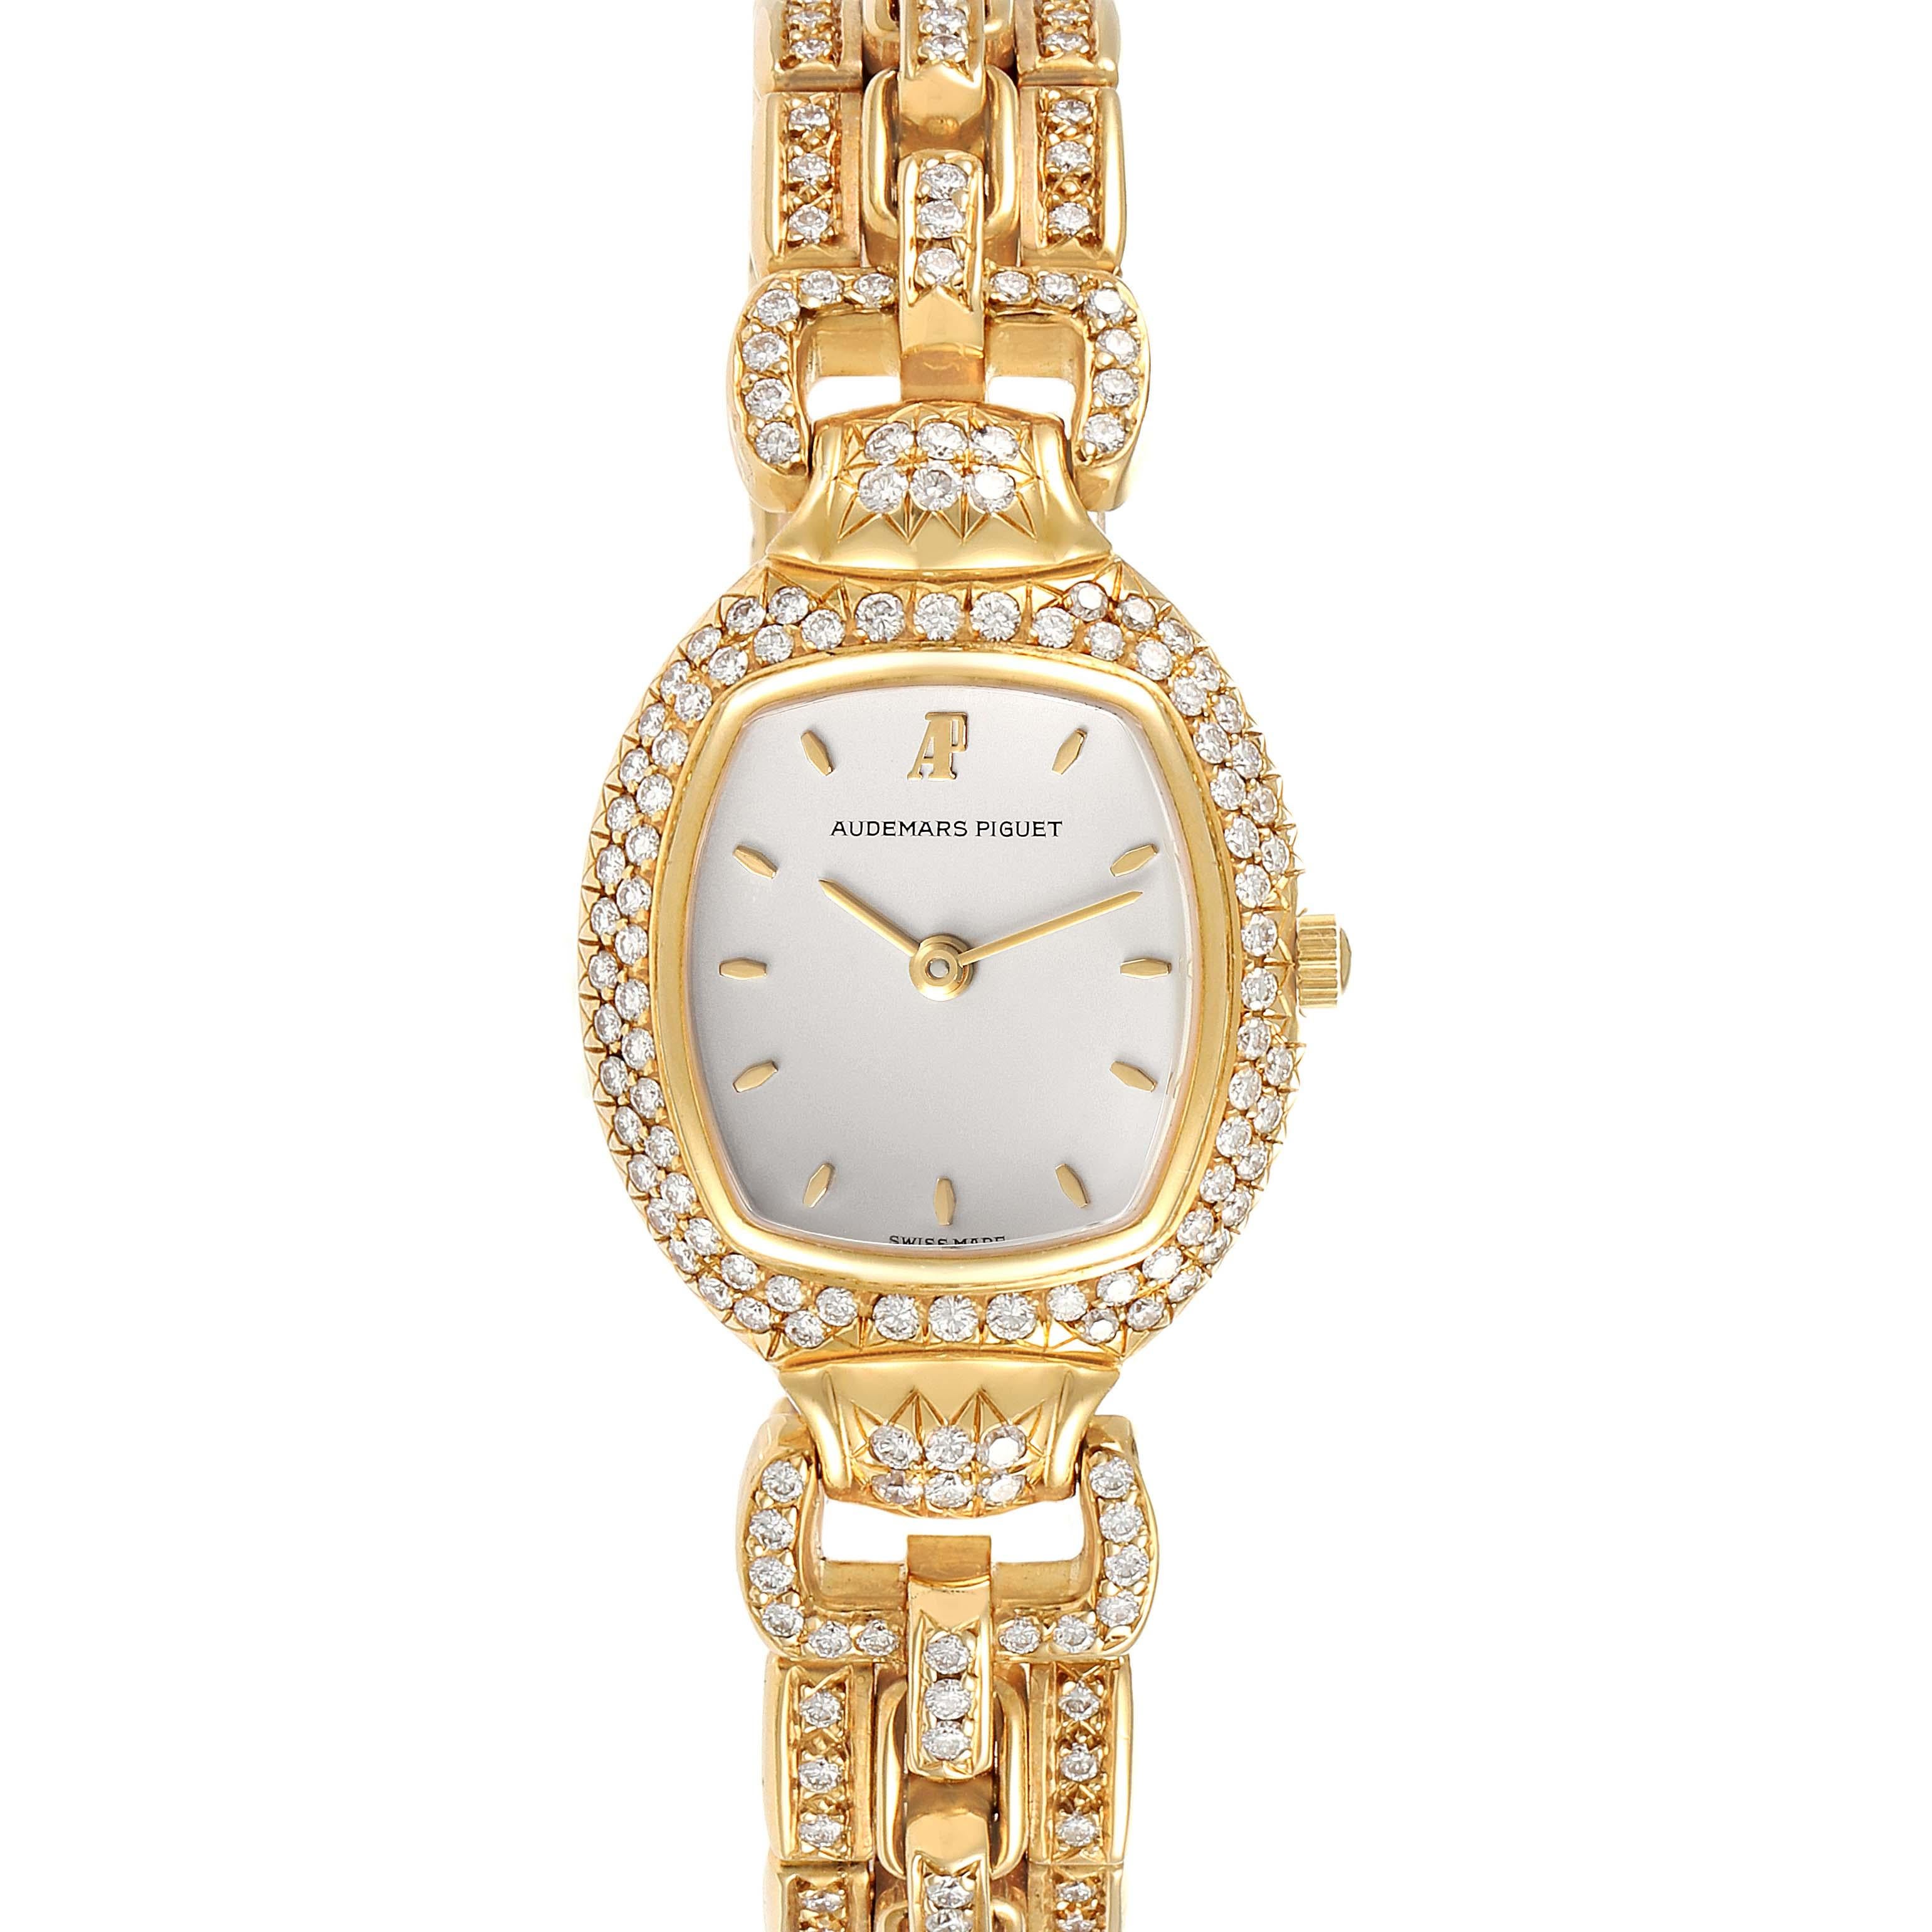 Audemars Piguet Audemarine Yellow Gold Diamond Ladies Watch 66474. Quartz movement. 18k yellow gold oval case 23 mm X 35.0mm. 18k yellow gold diamond bezel. Scratch resistant sapphire crystal. Silver dial with raised yellow gold hour baton markers.